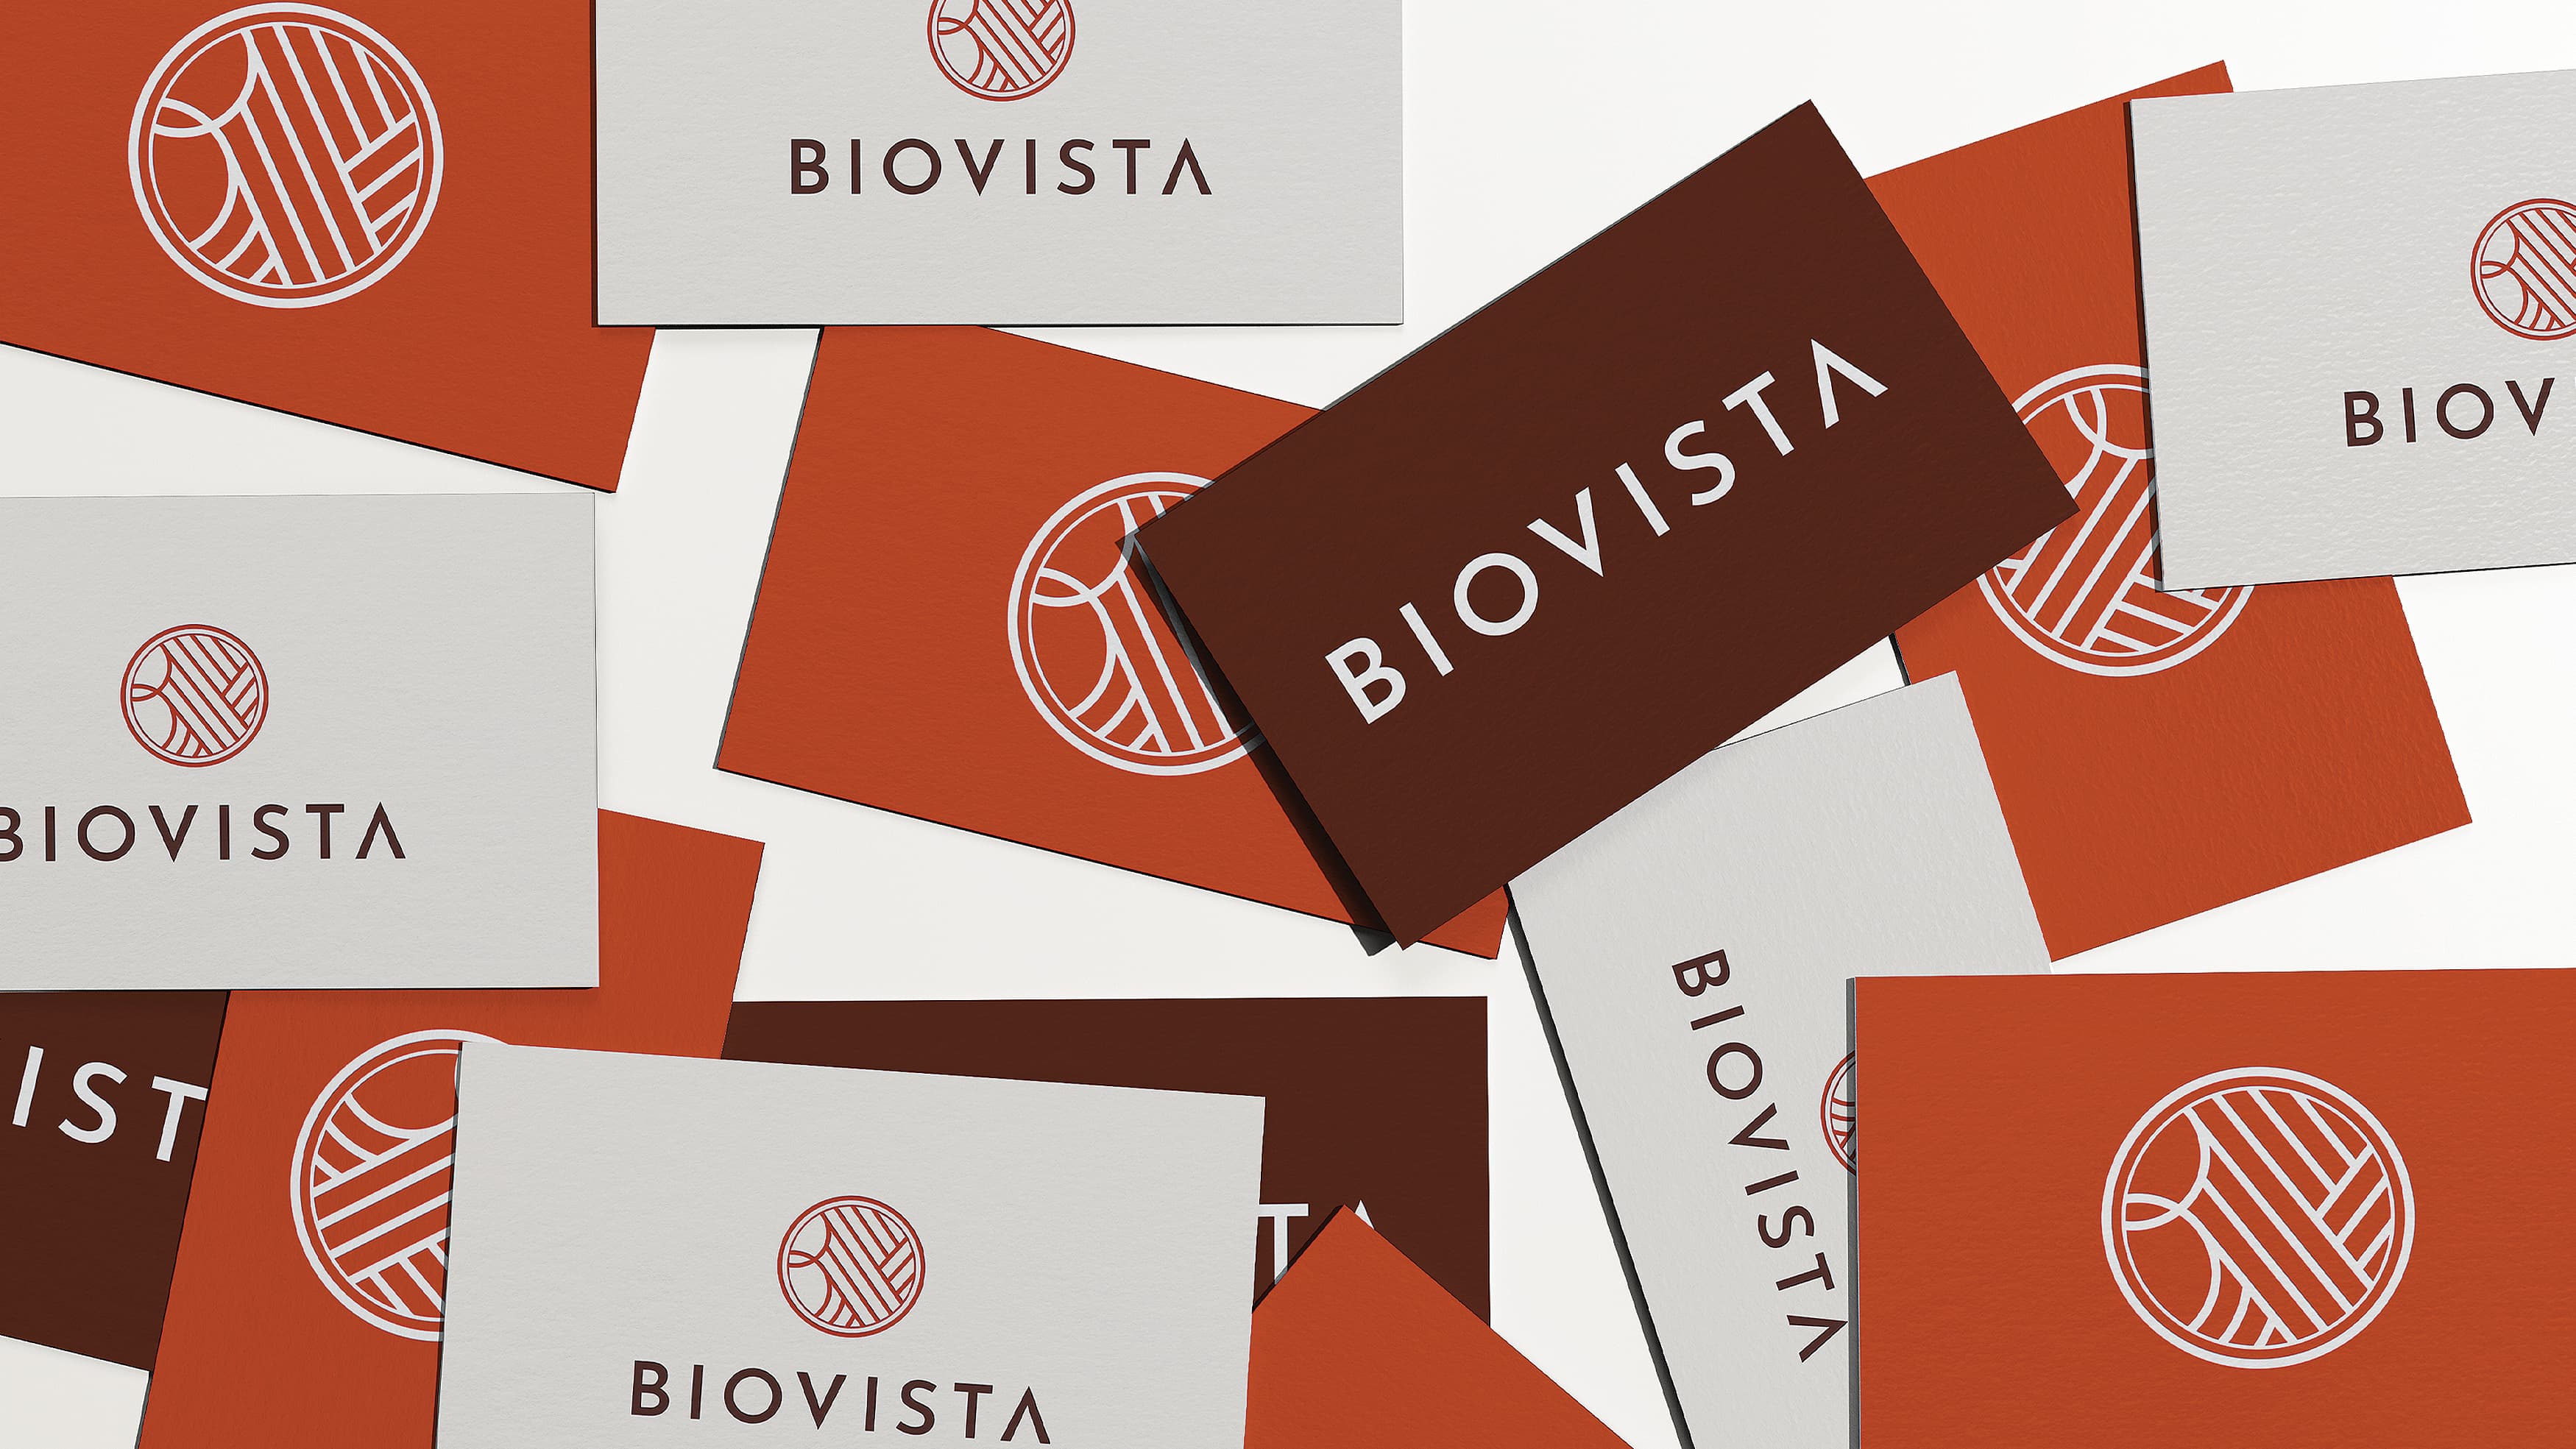 Colorful orange business cards spread across a table with the Biovista logo on them.